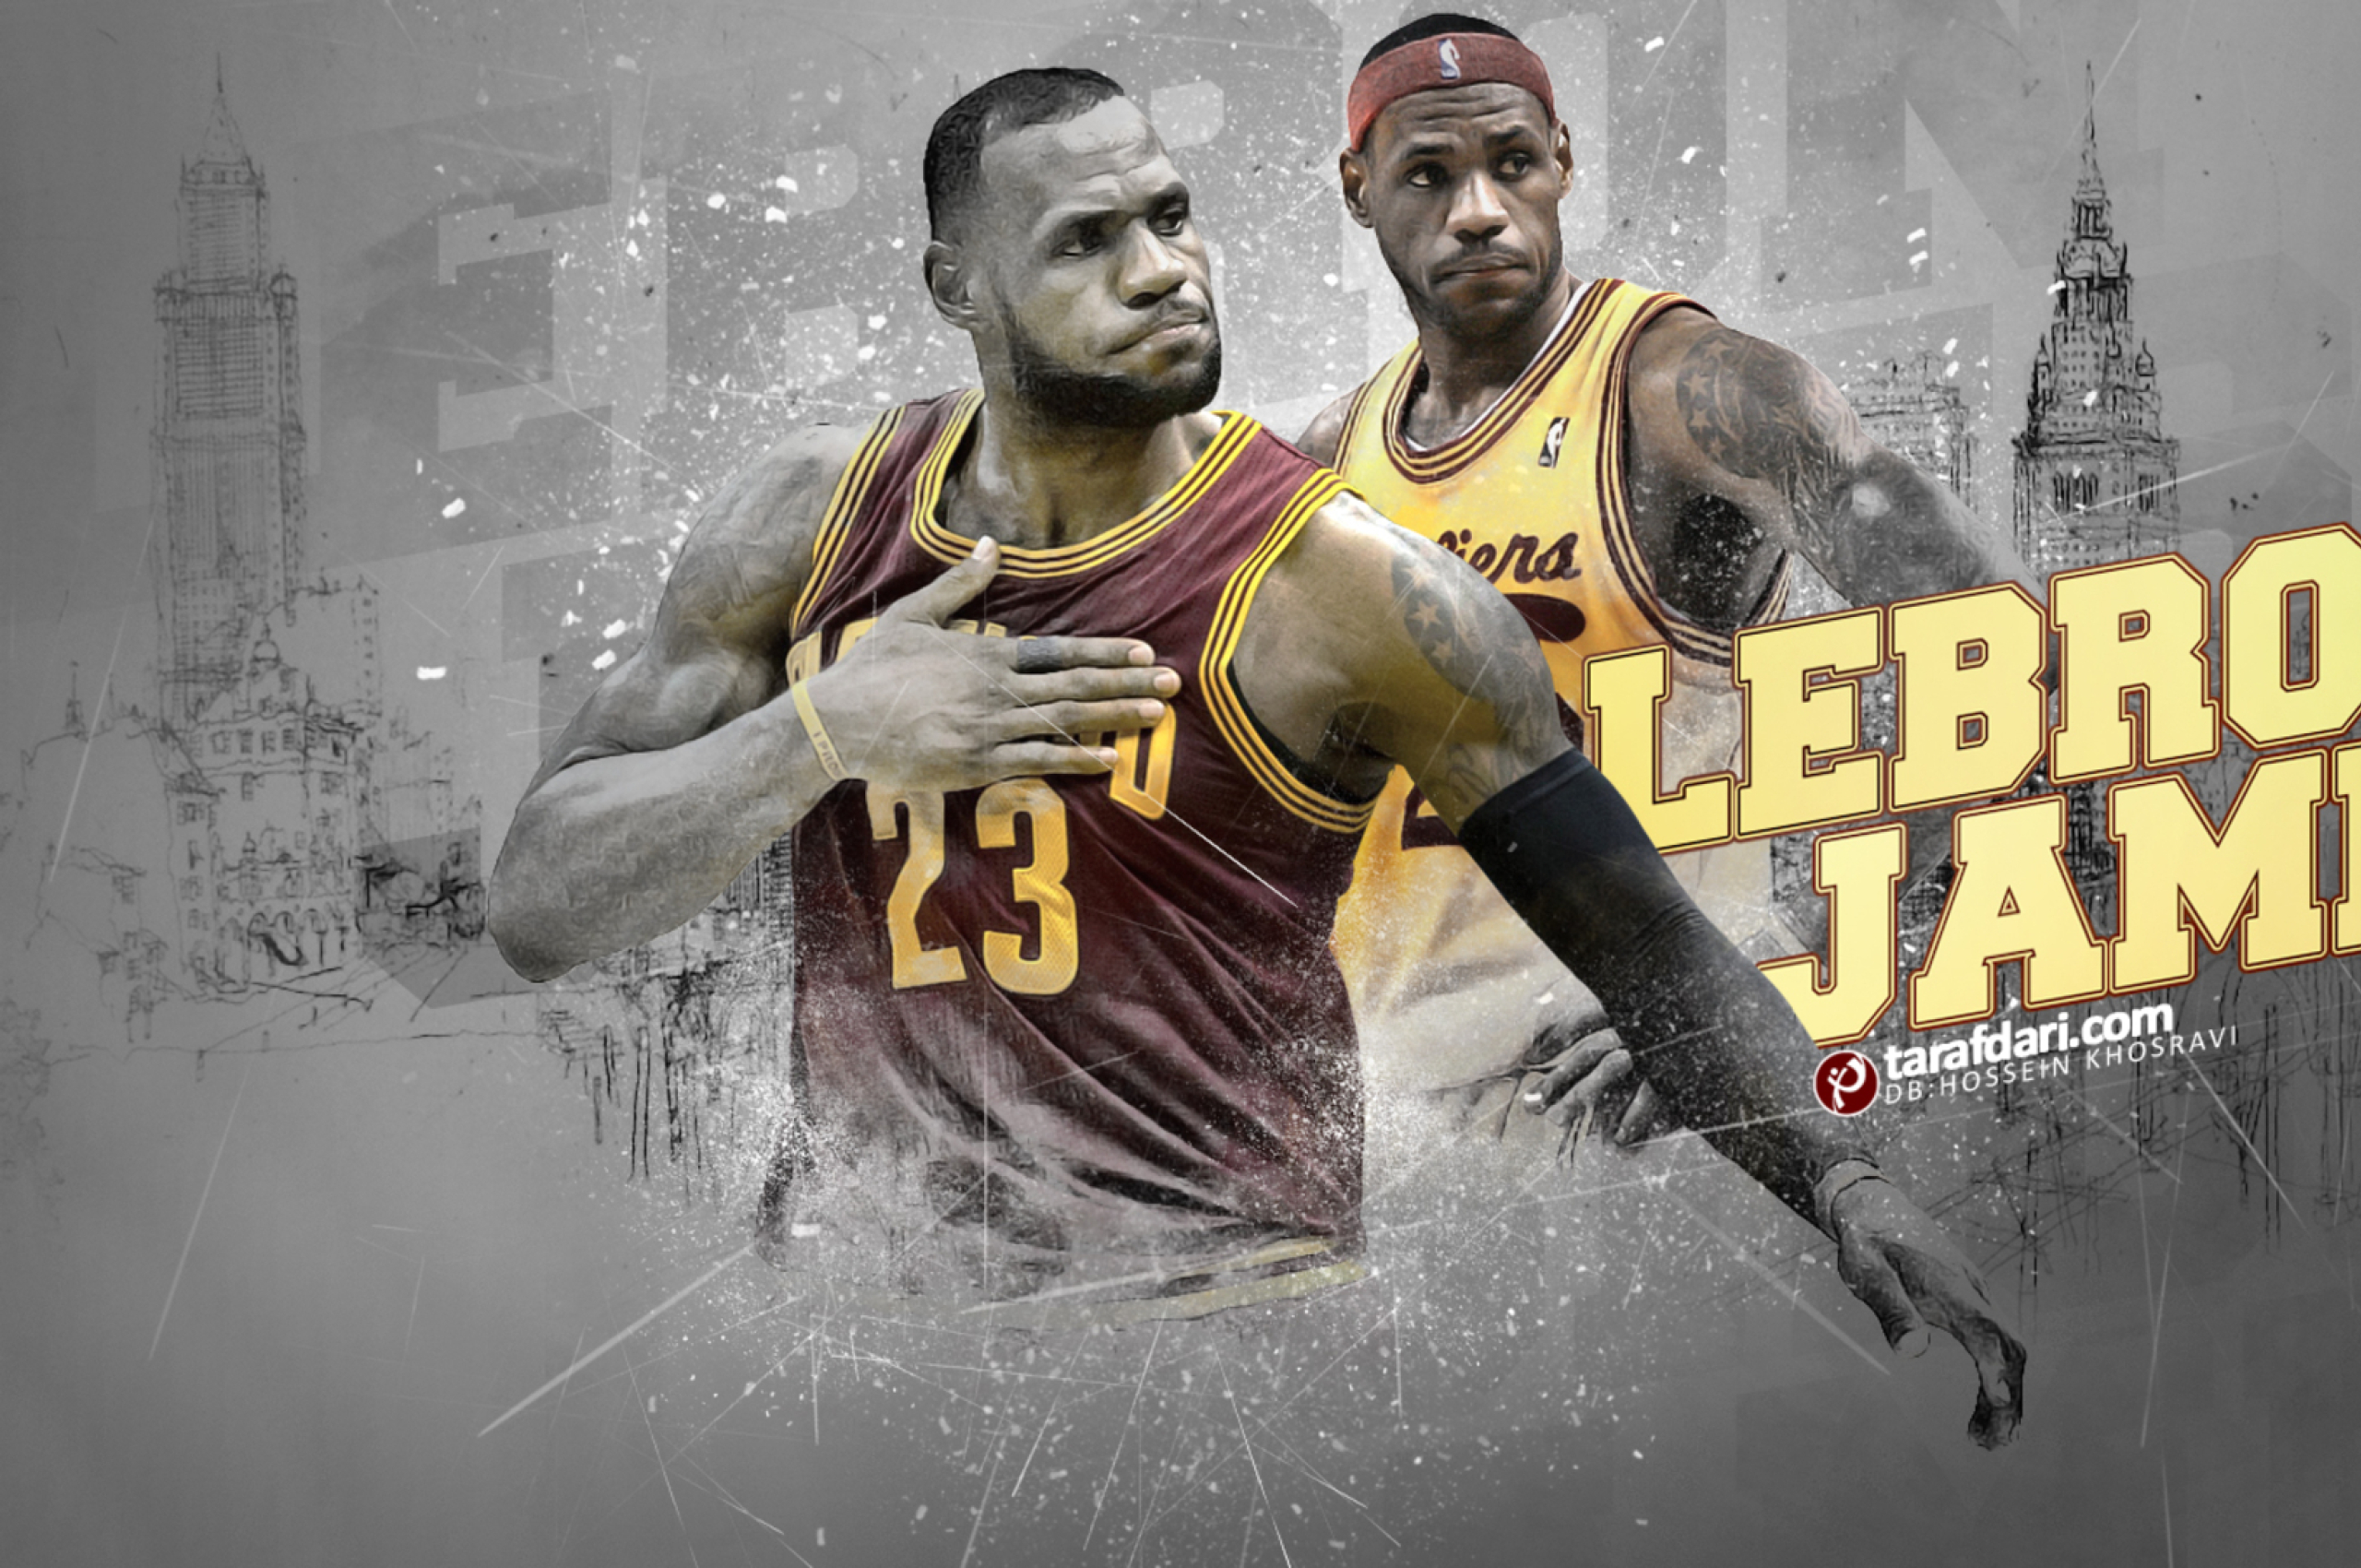 541159 1920x1080 lebron james images background JPG 283 kB  Rare Gallery  HD Wallpapers